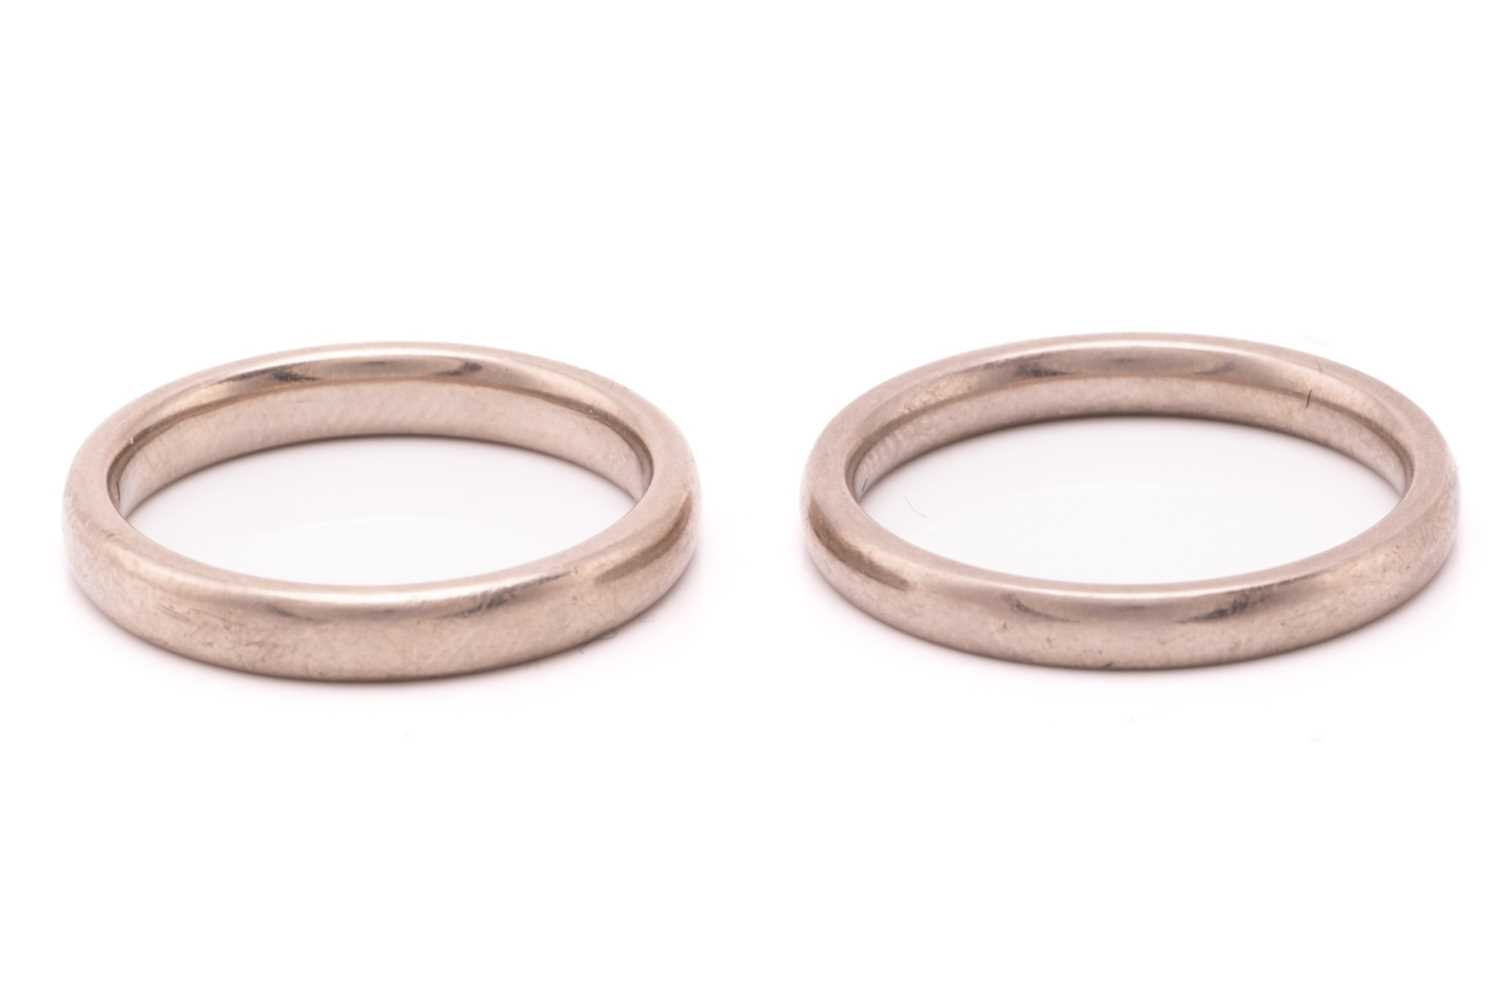 Two wedding bands in 18ct white gold; the first one is constructed with a plain court-profile